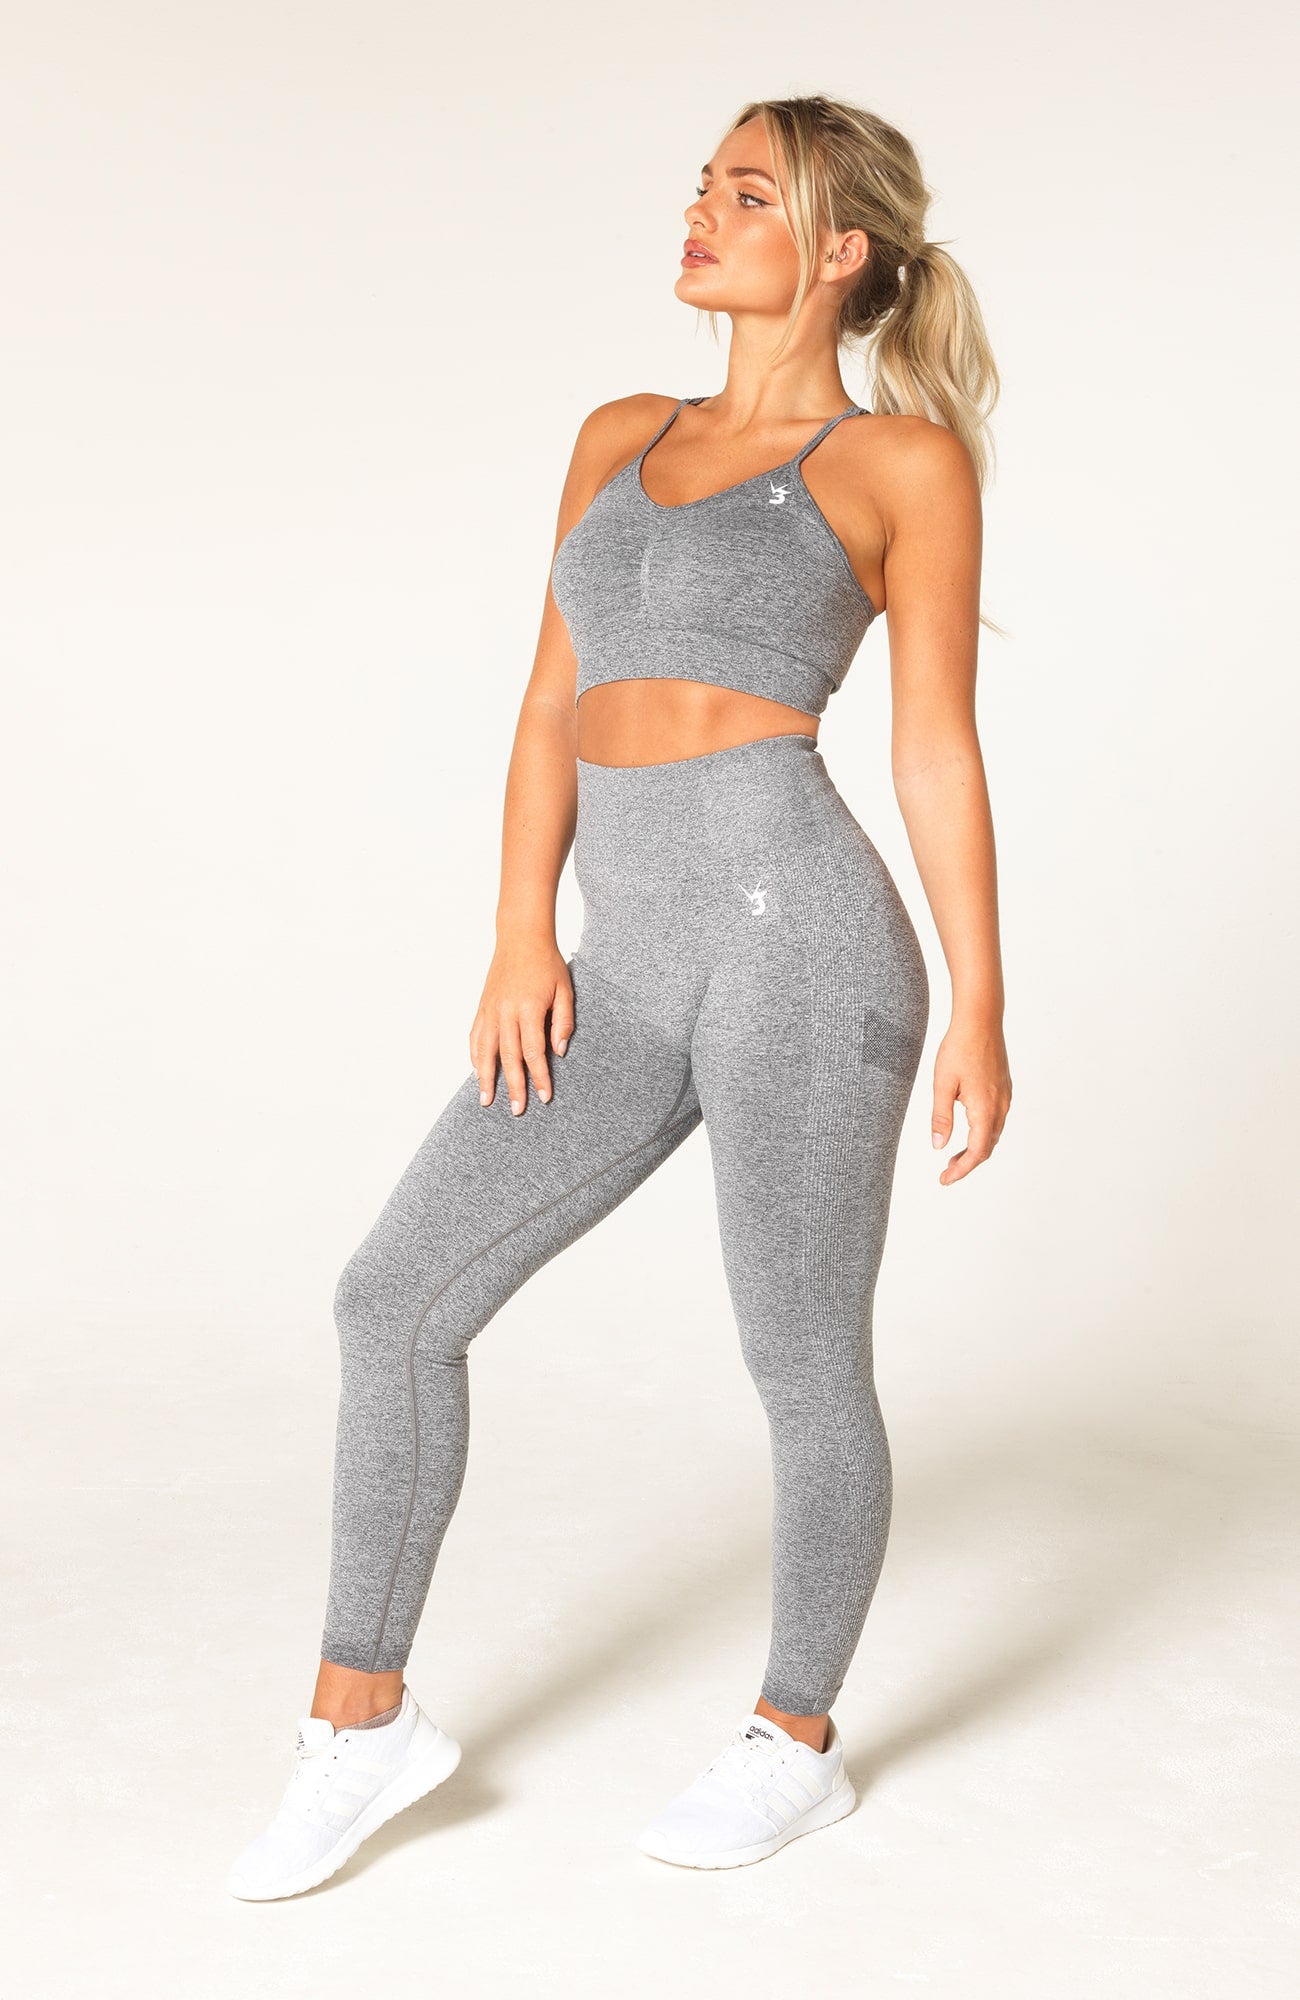 redbaysand Women's Define seamless scrunch bum shaping high waisted leggings in grey marl – Squat proof sports tights for Gym workouts training, Running, yoga, bodybuilding and bikini fitness.